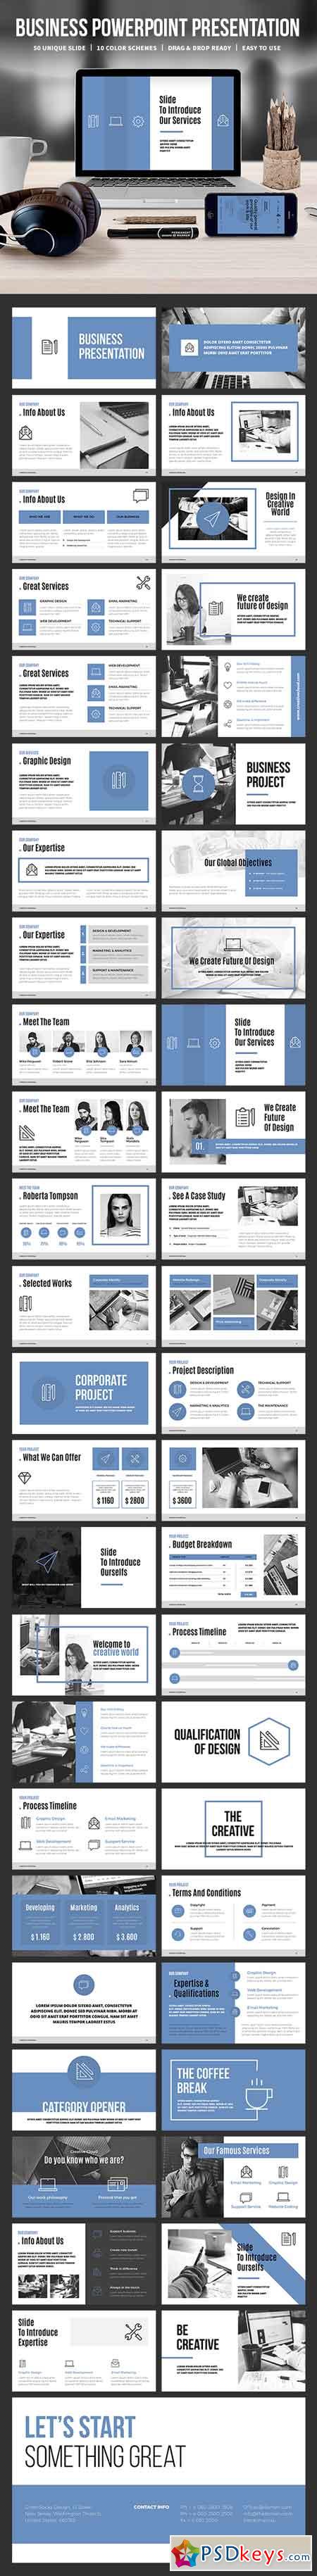 Business Powerpoint Template 19440627